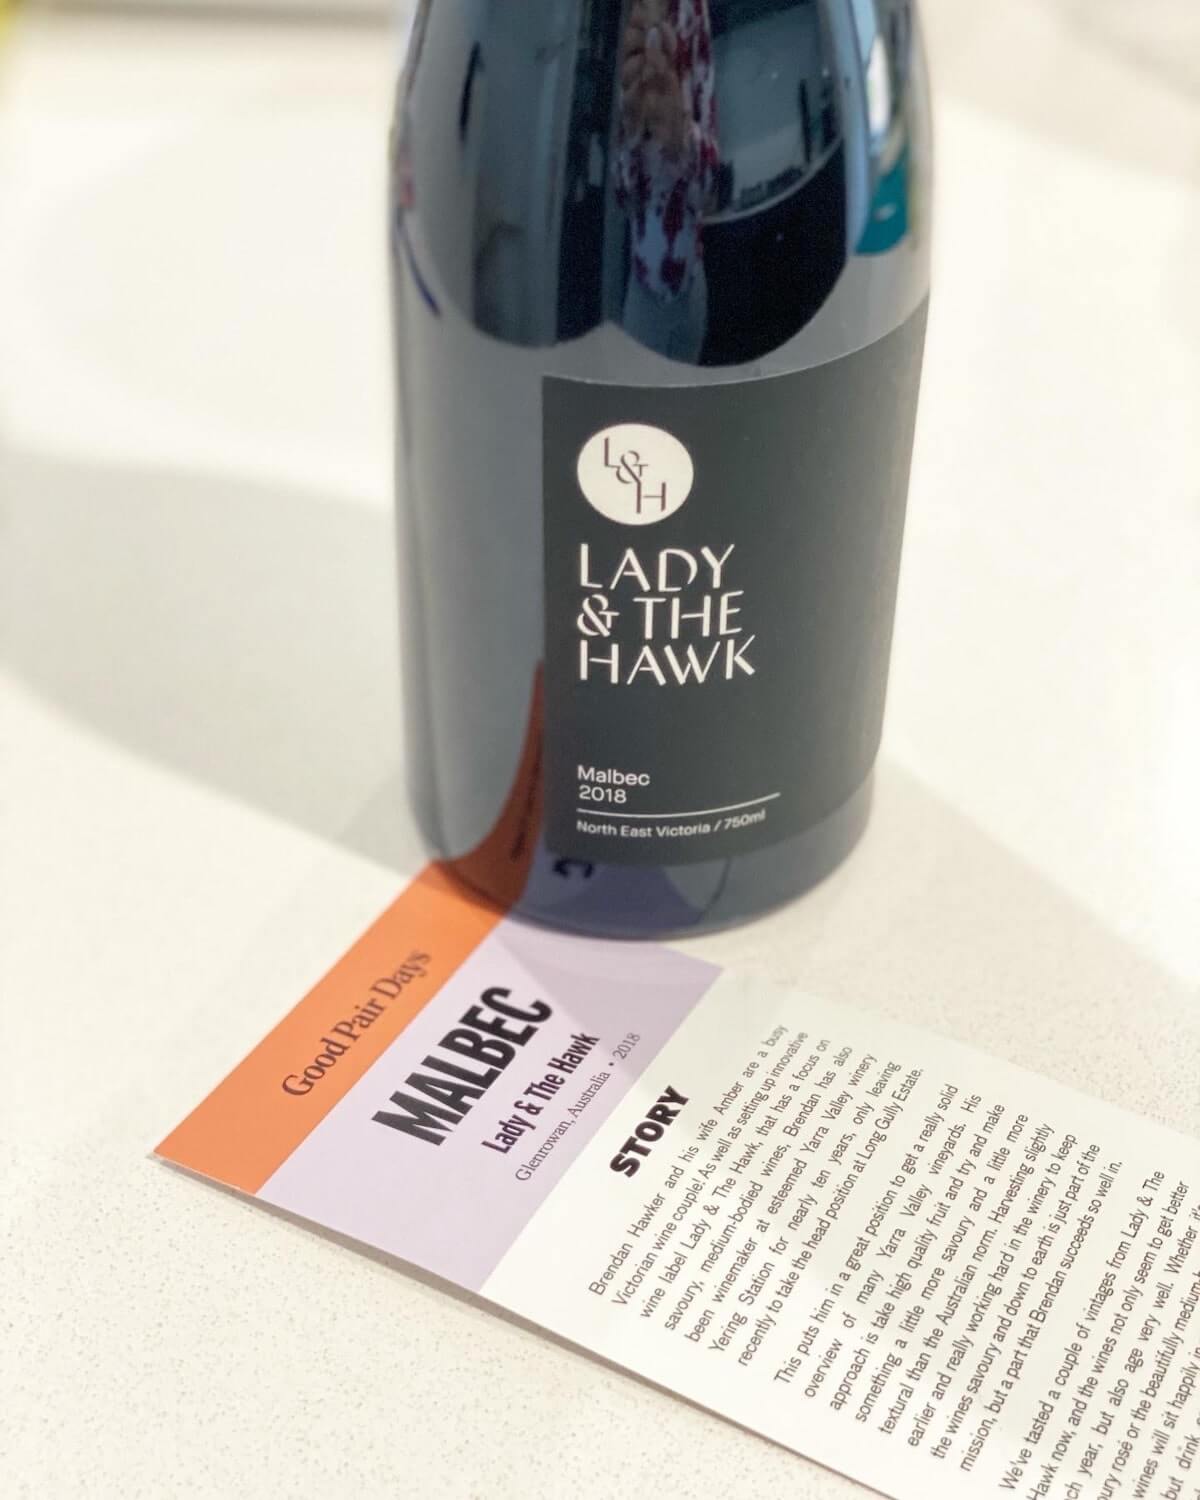 Bottle of Lady and The Hawk 2018 Malbec - Good Pair Days